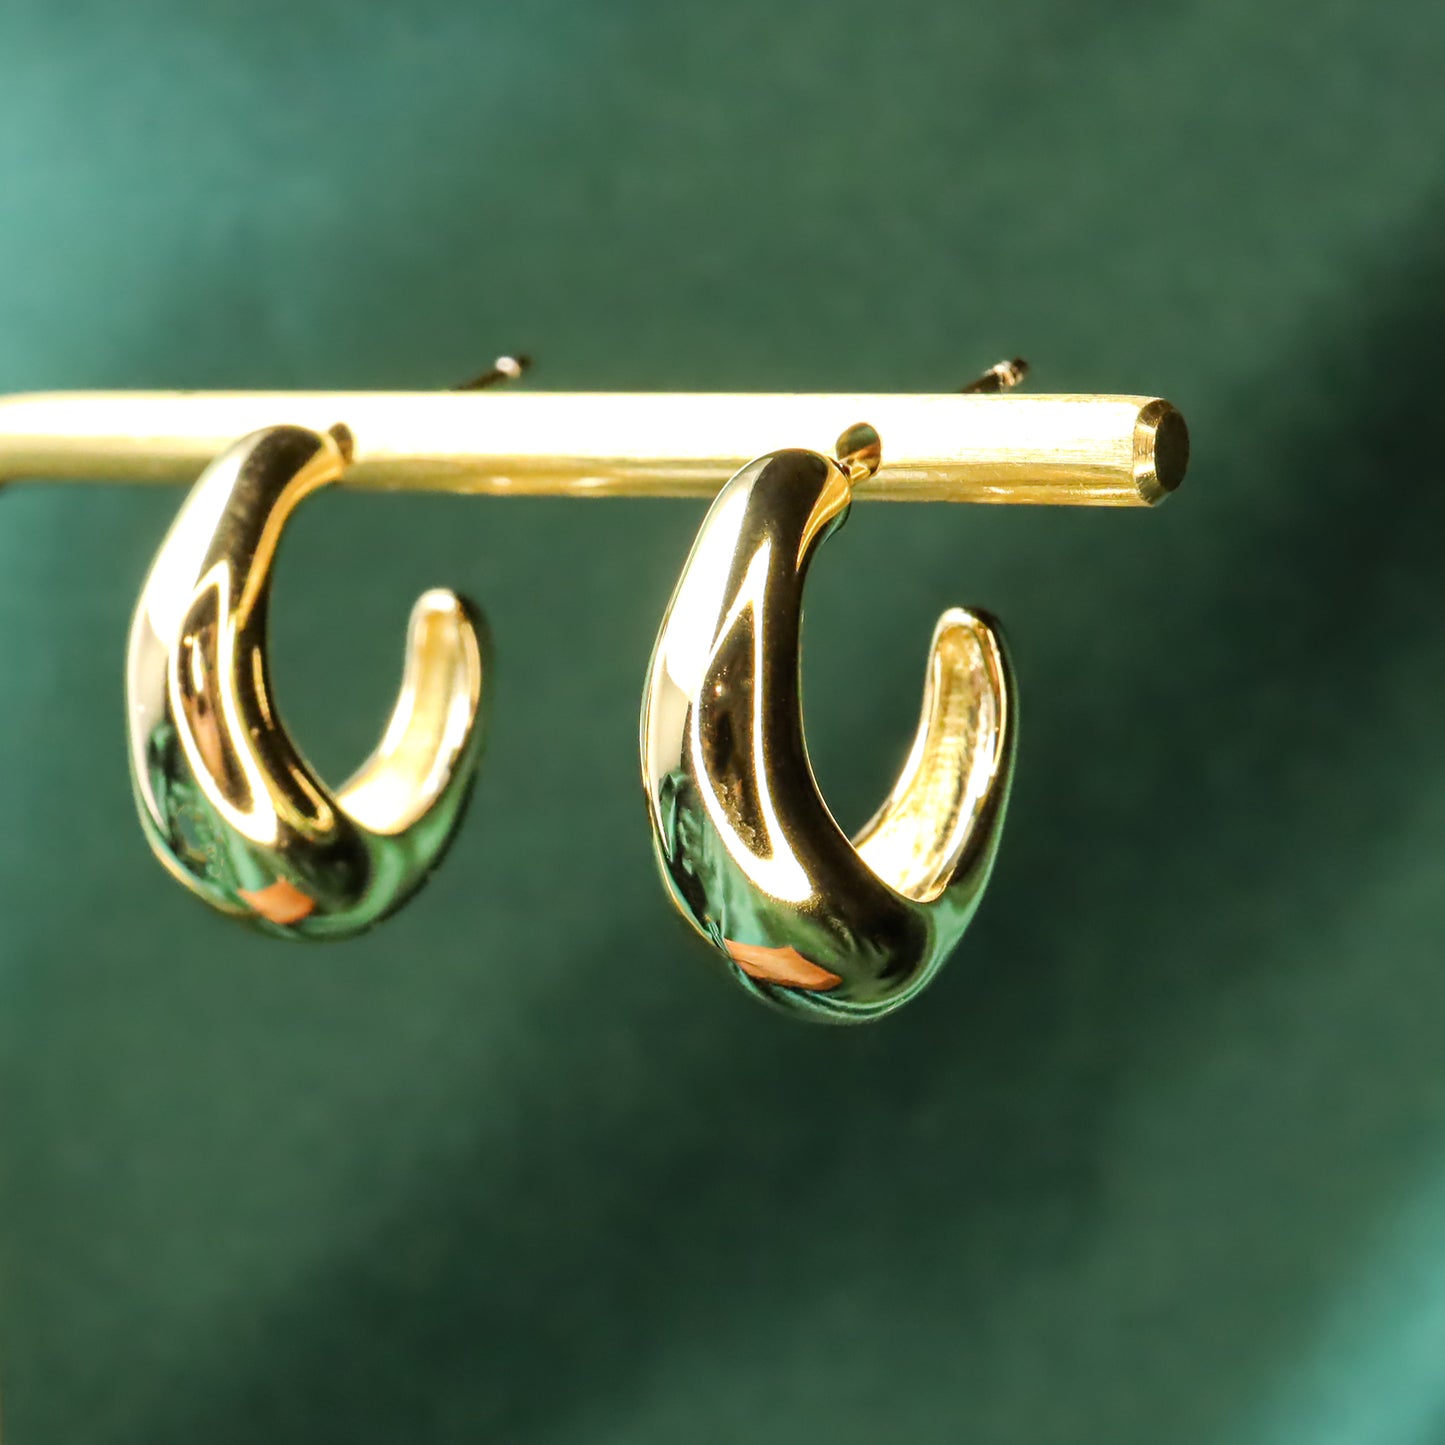 Vintage C Shape Gold Plated S925 Sterling Silver Stud Earrings